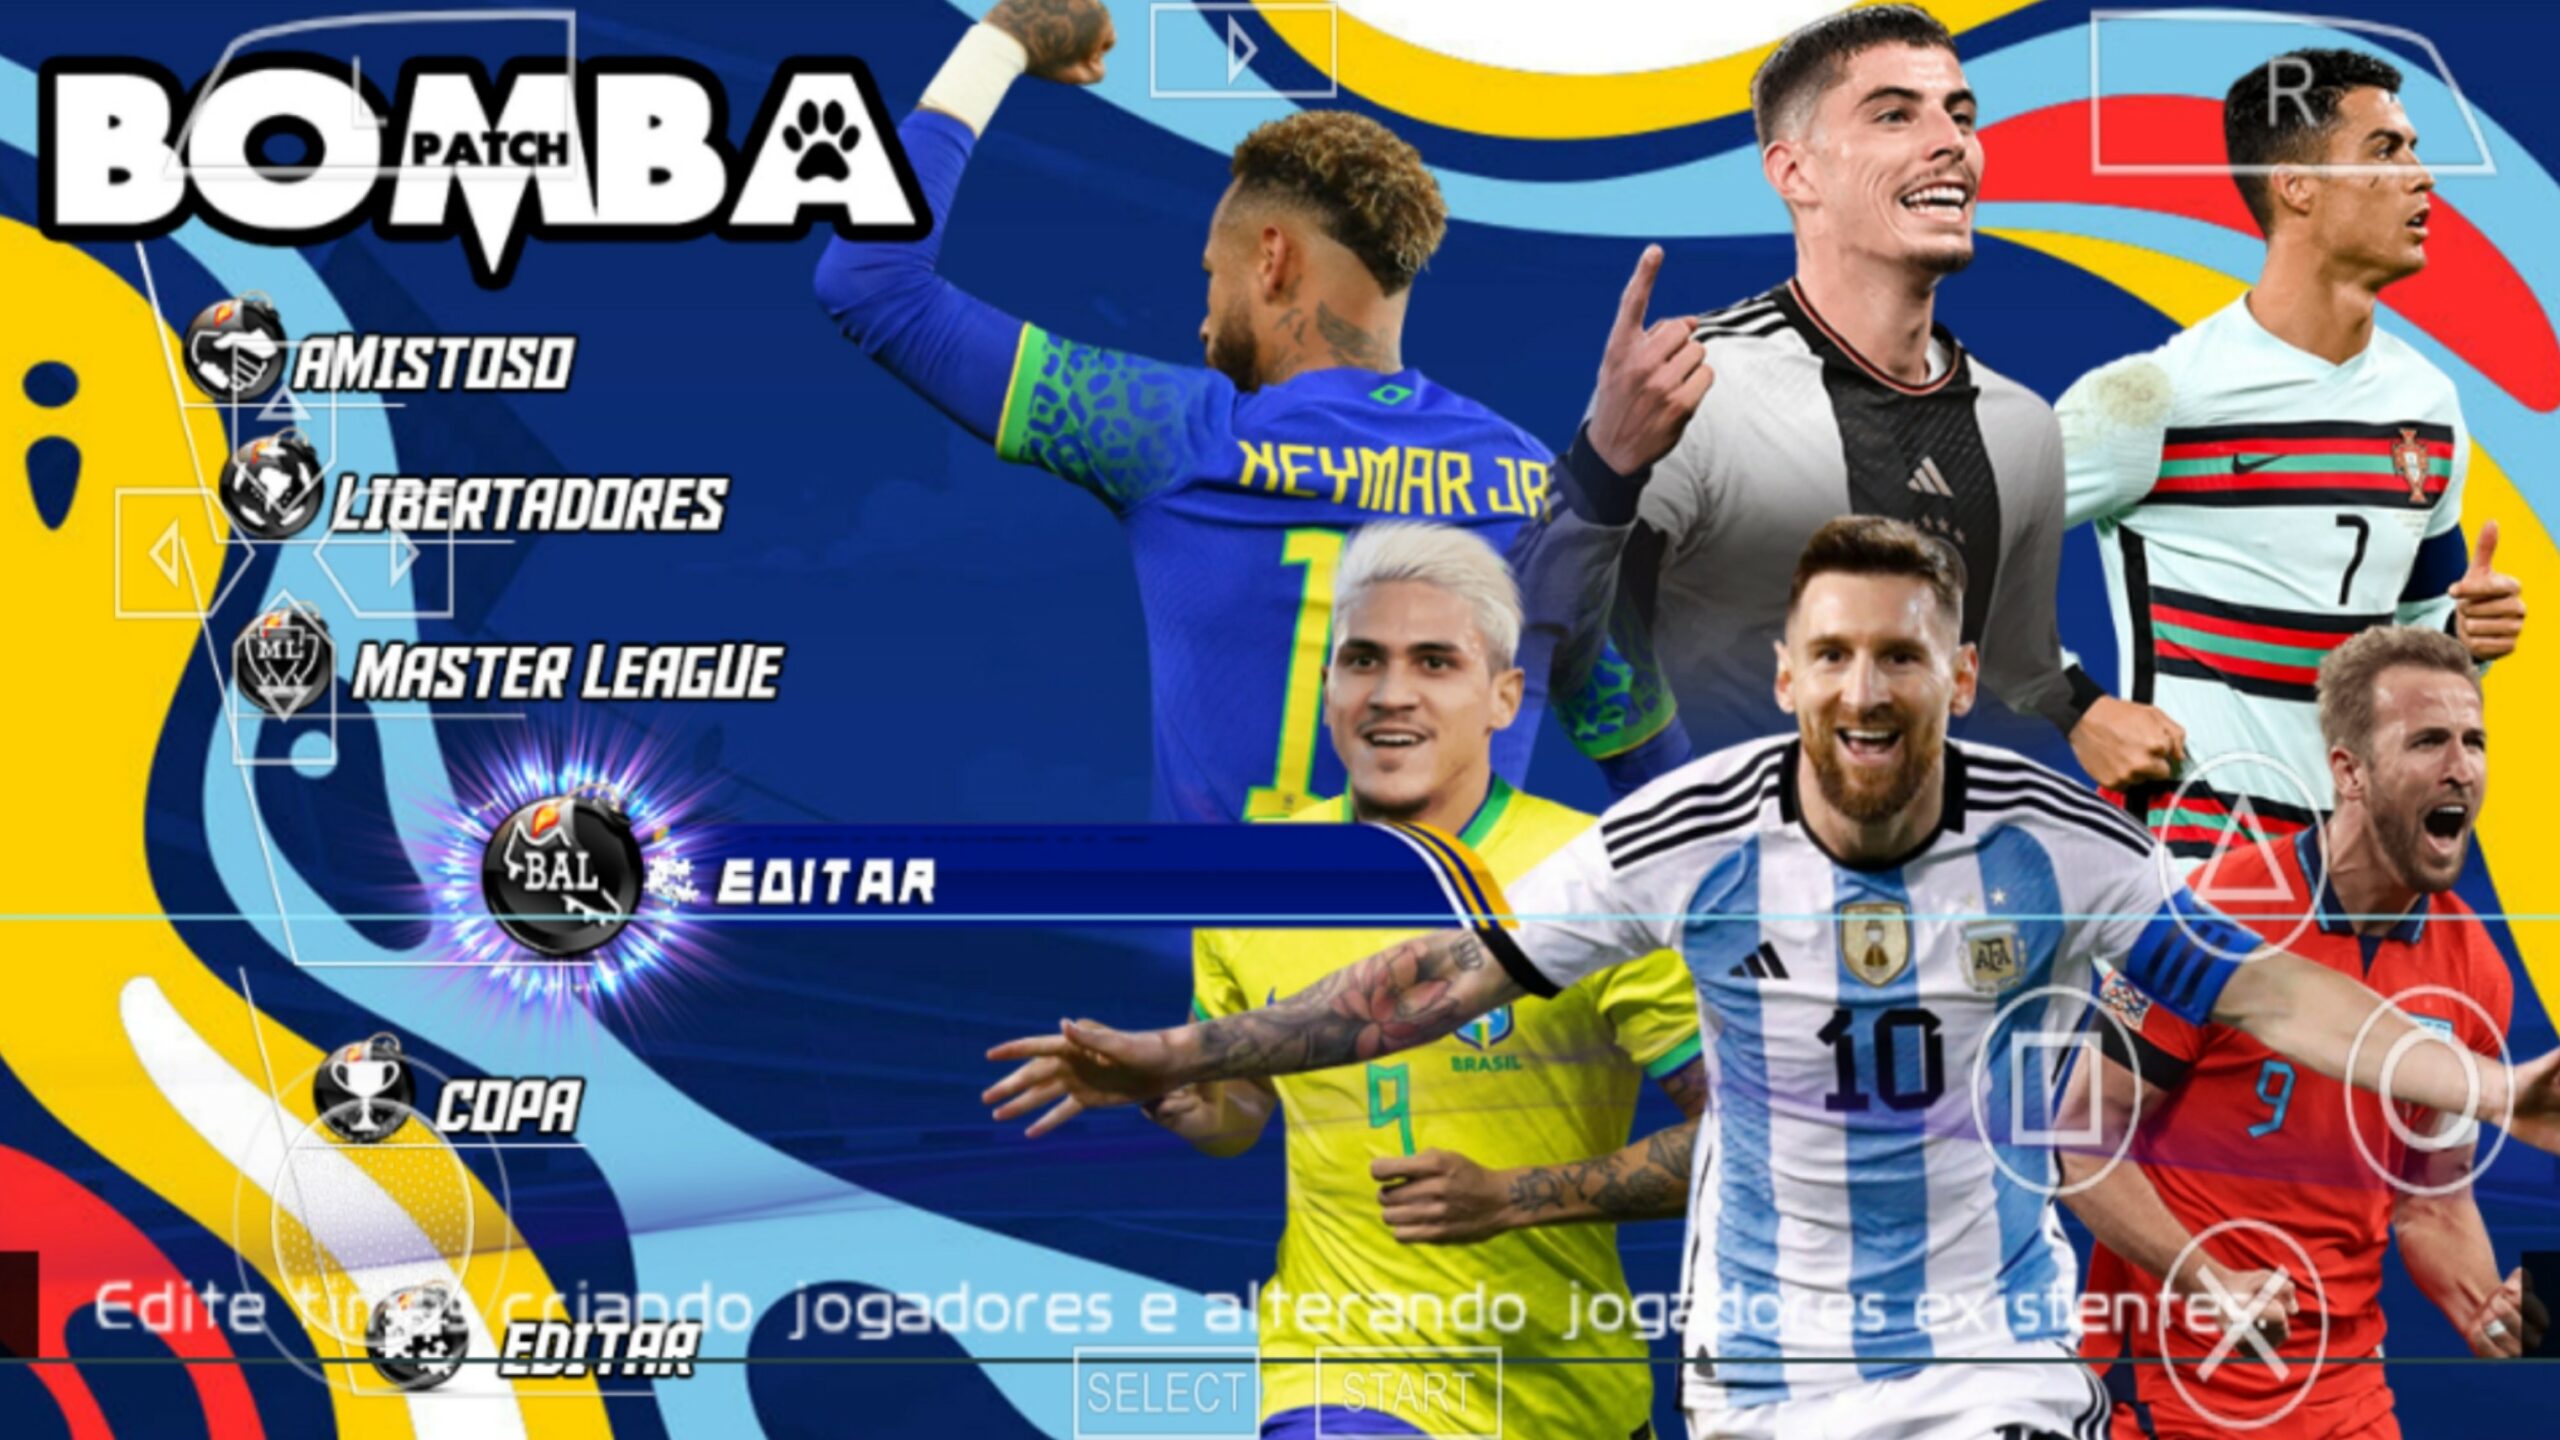 🚨 BOMBA PATCH 2023 (PPSSPP) JUNHO 100% ATUALIZADO ANDROID! MESSI